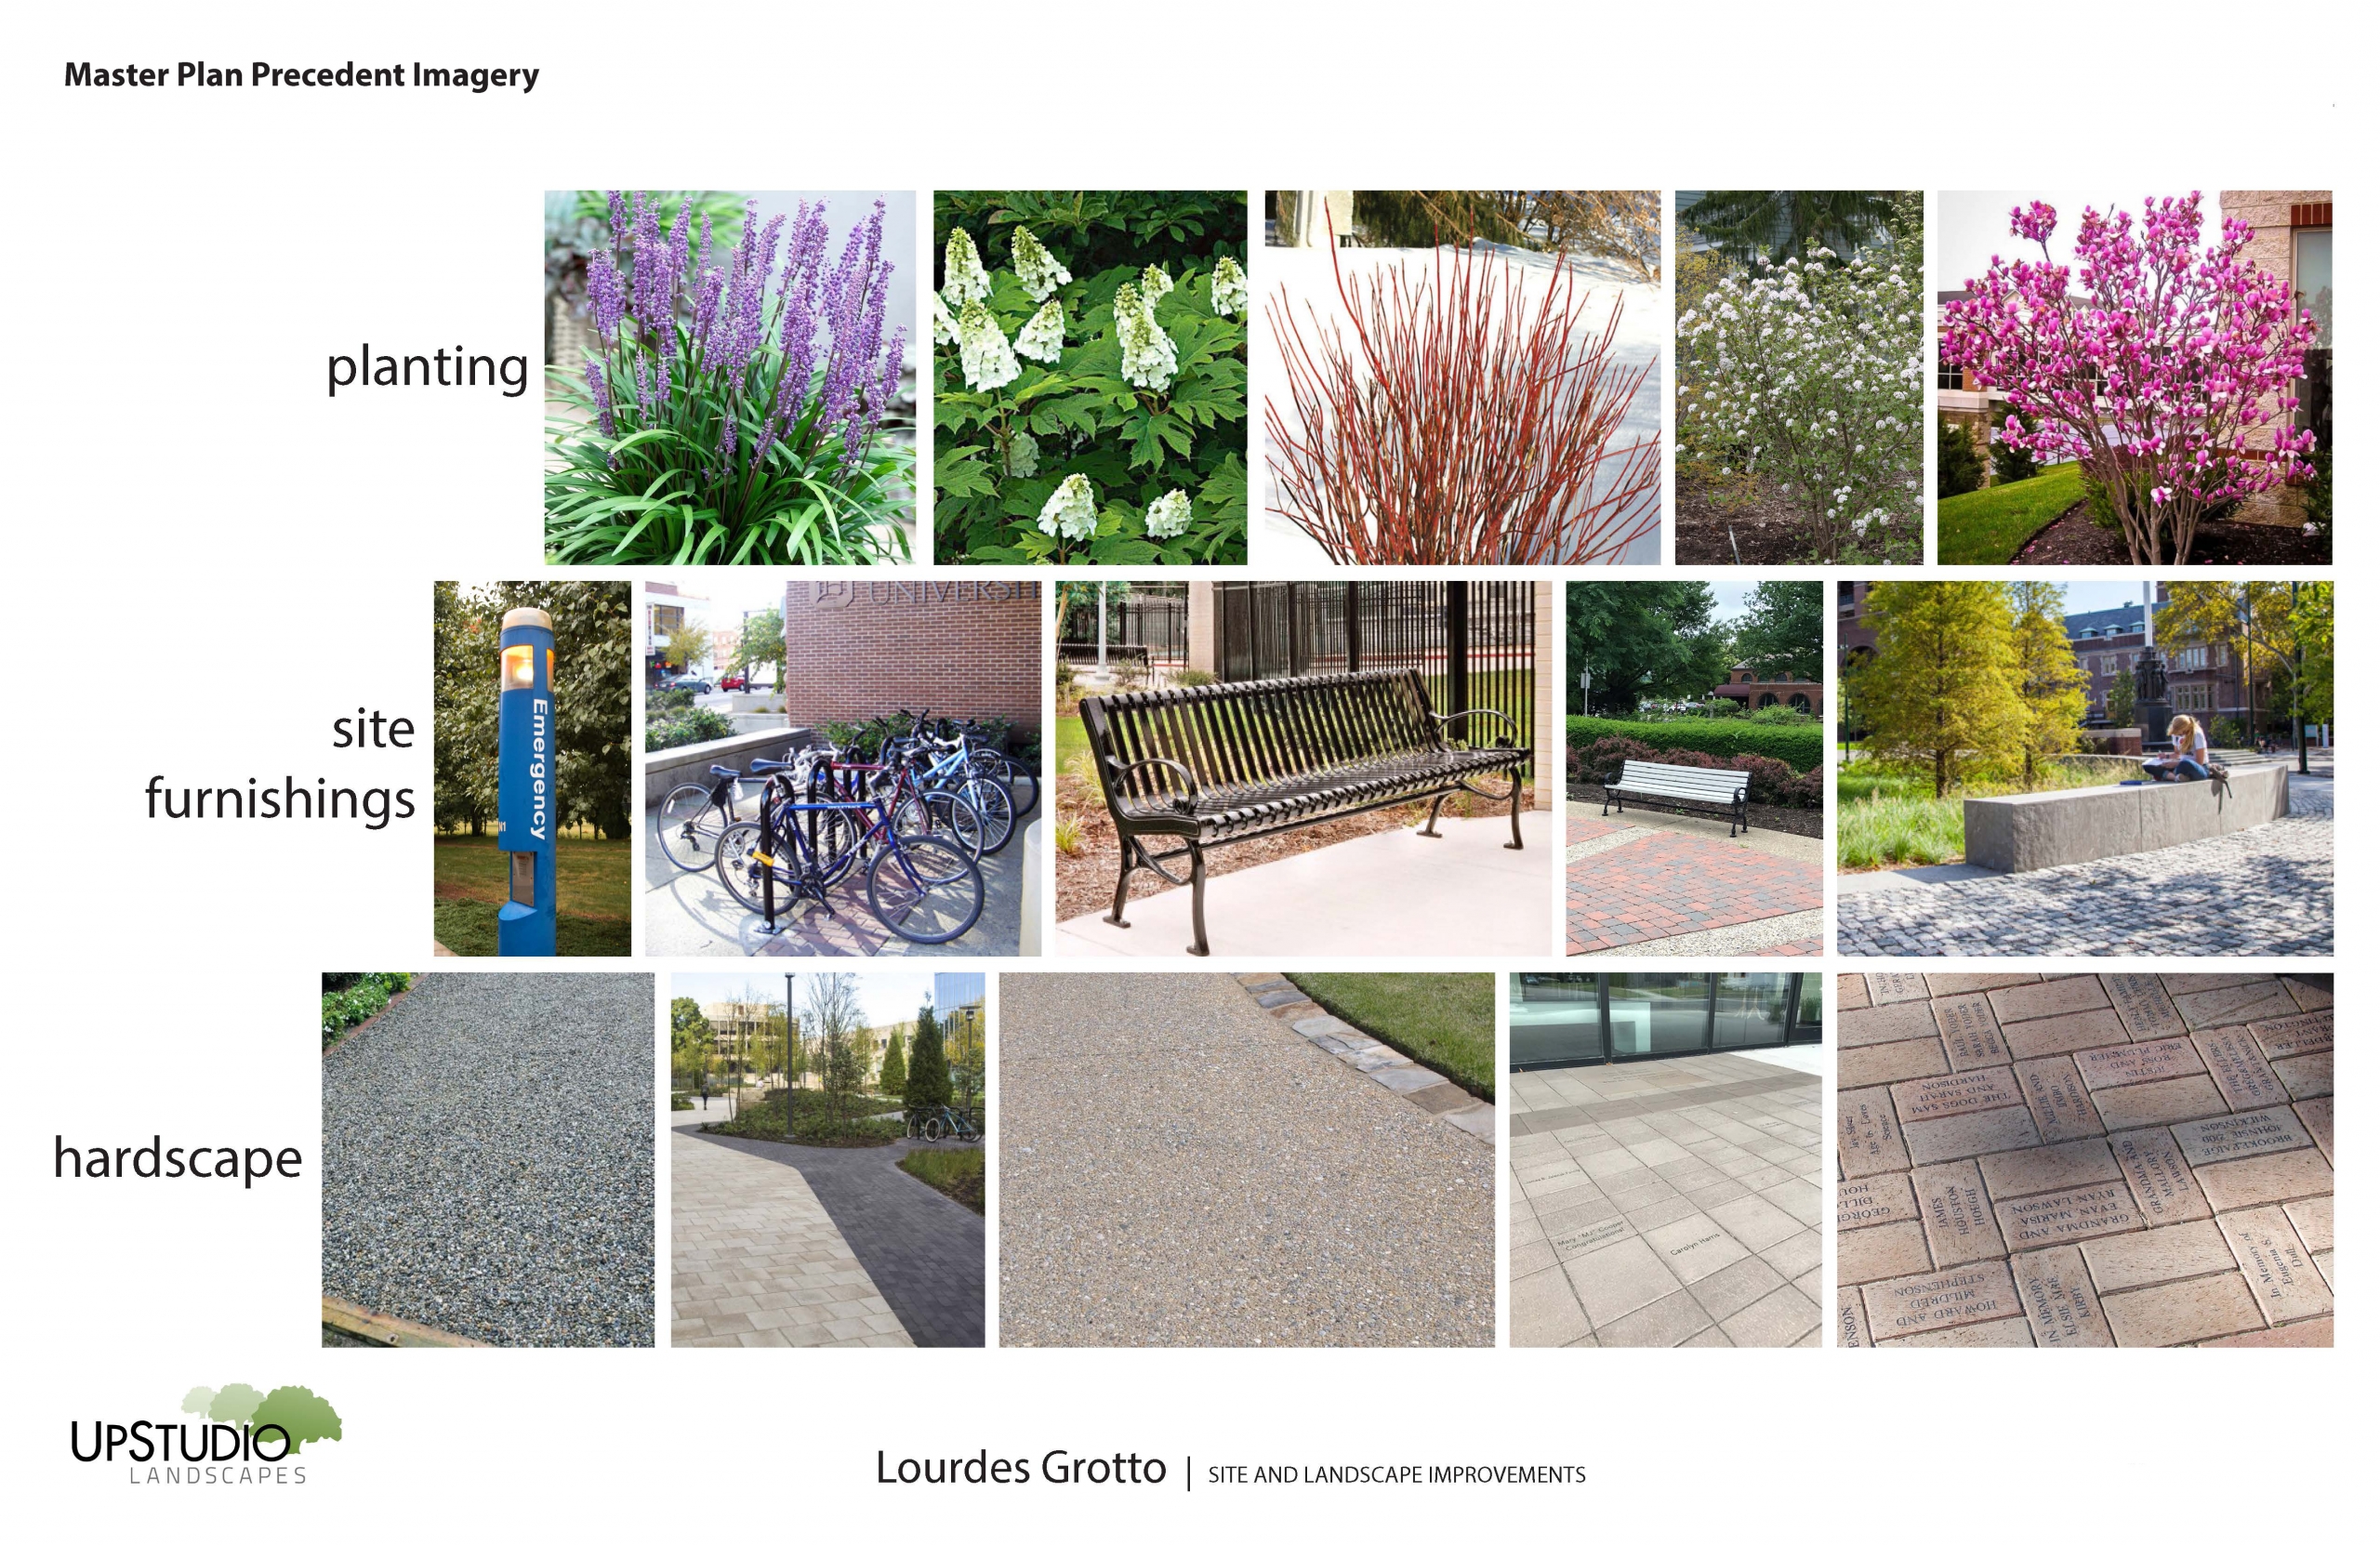 precedent imagery of site improvements and plantings